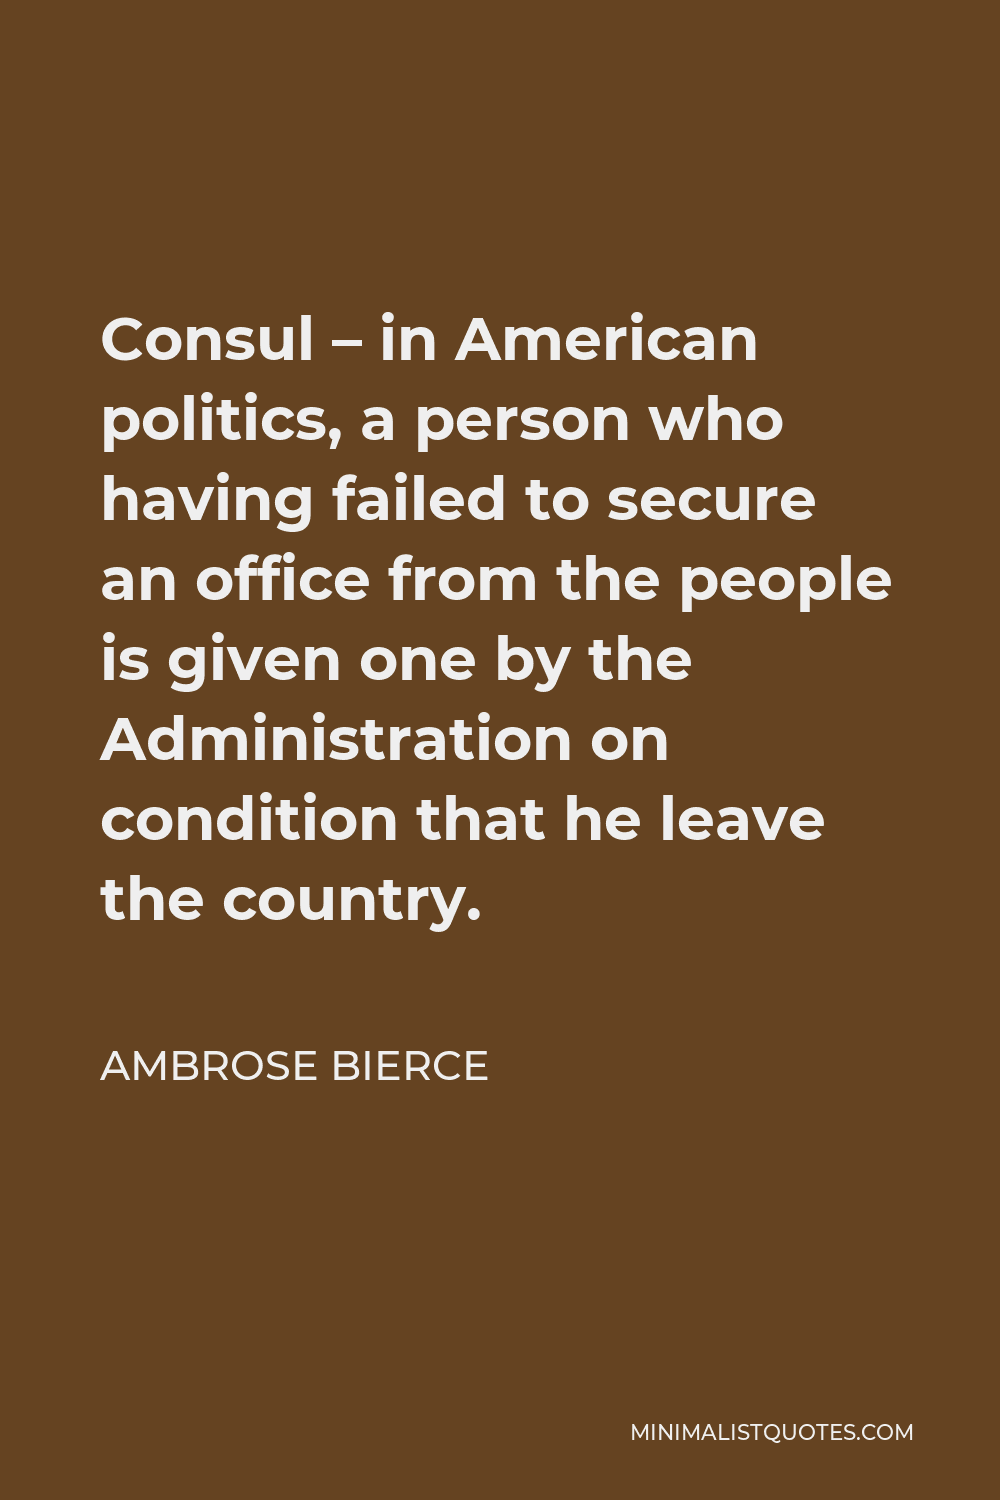 Ambrose Bierce Quote - Consul – in American politics, a person who having failed to secure an office from the people is given one by the Administration on condition that he leave the country.